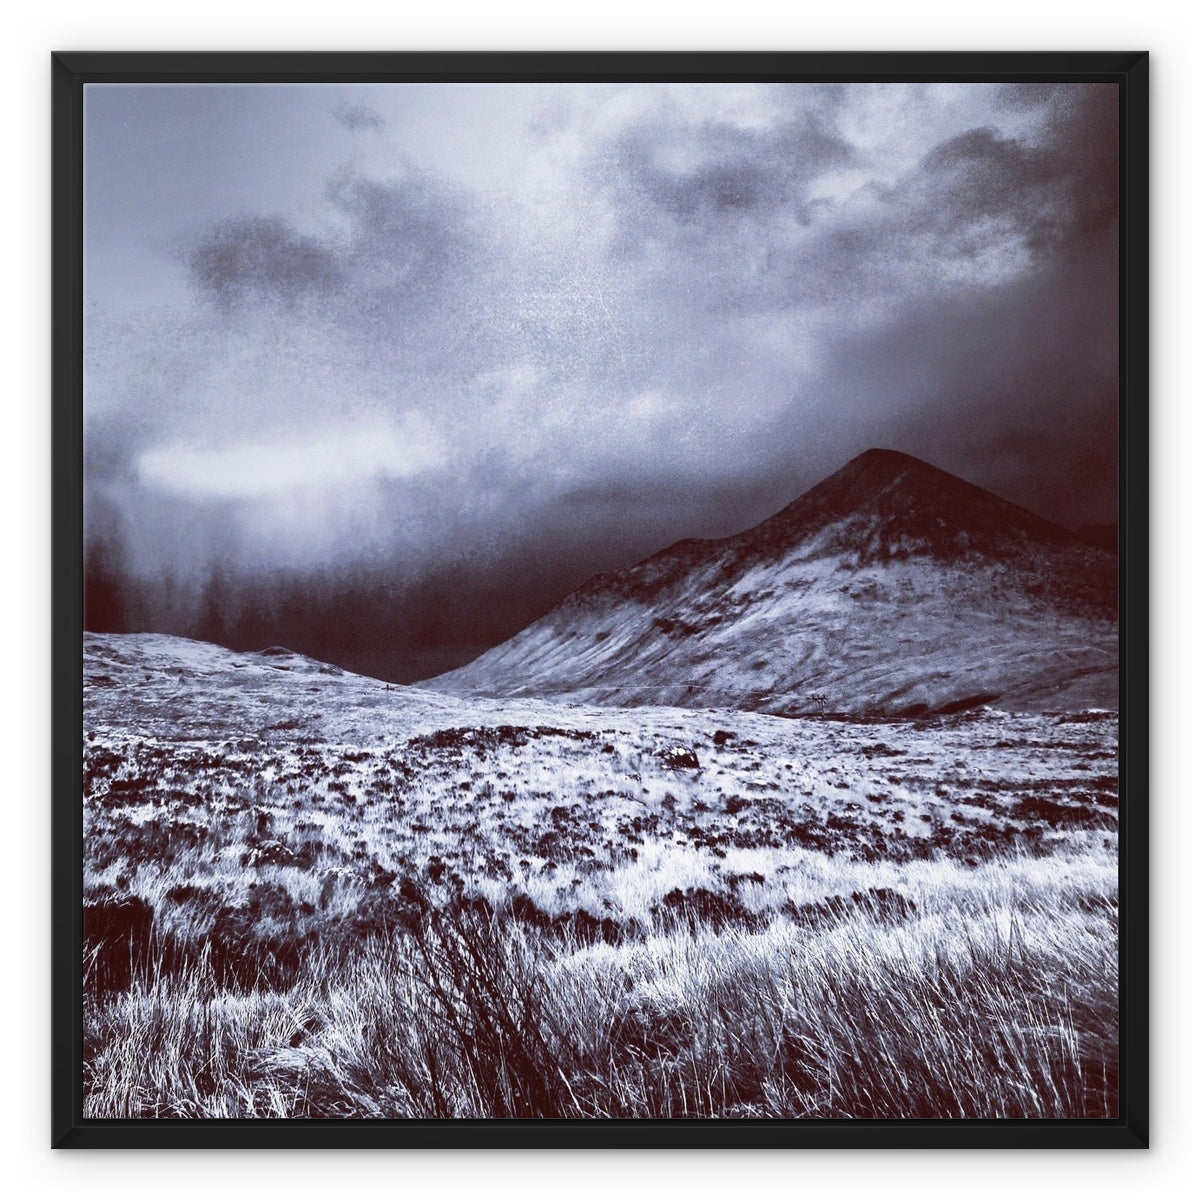 A Brooding Glen Varagil Skye Painting | Framed Canvas From Scotland-Floating Framed Canvas Prints-Skye Art Gallery-24"x24"-Black Frame-Paintings, Prints, Homeware, Art Gifts From Scotland By Scottish Artist Kevin Hunter